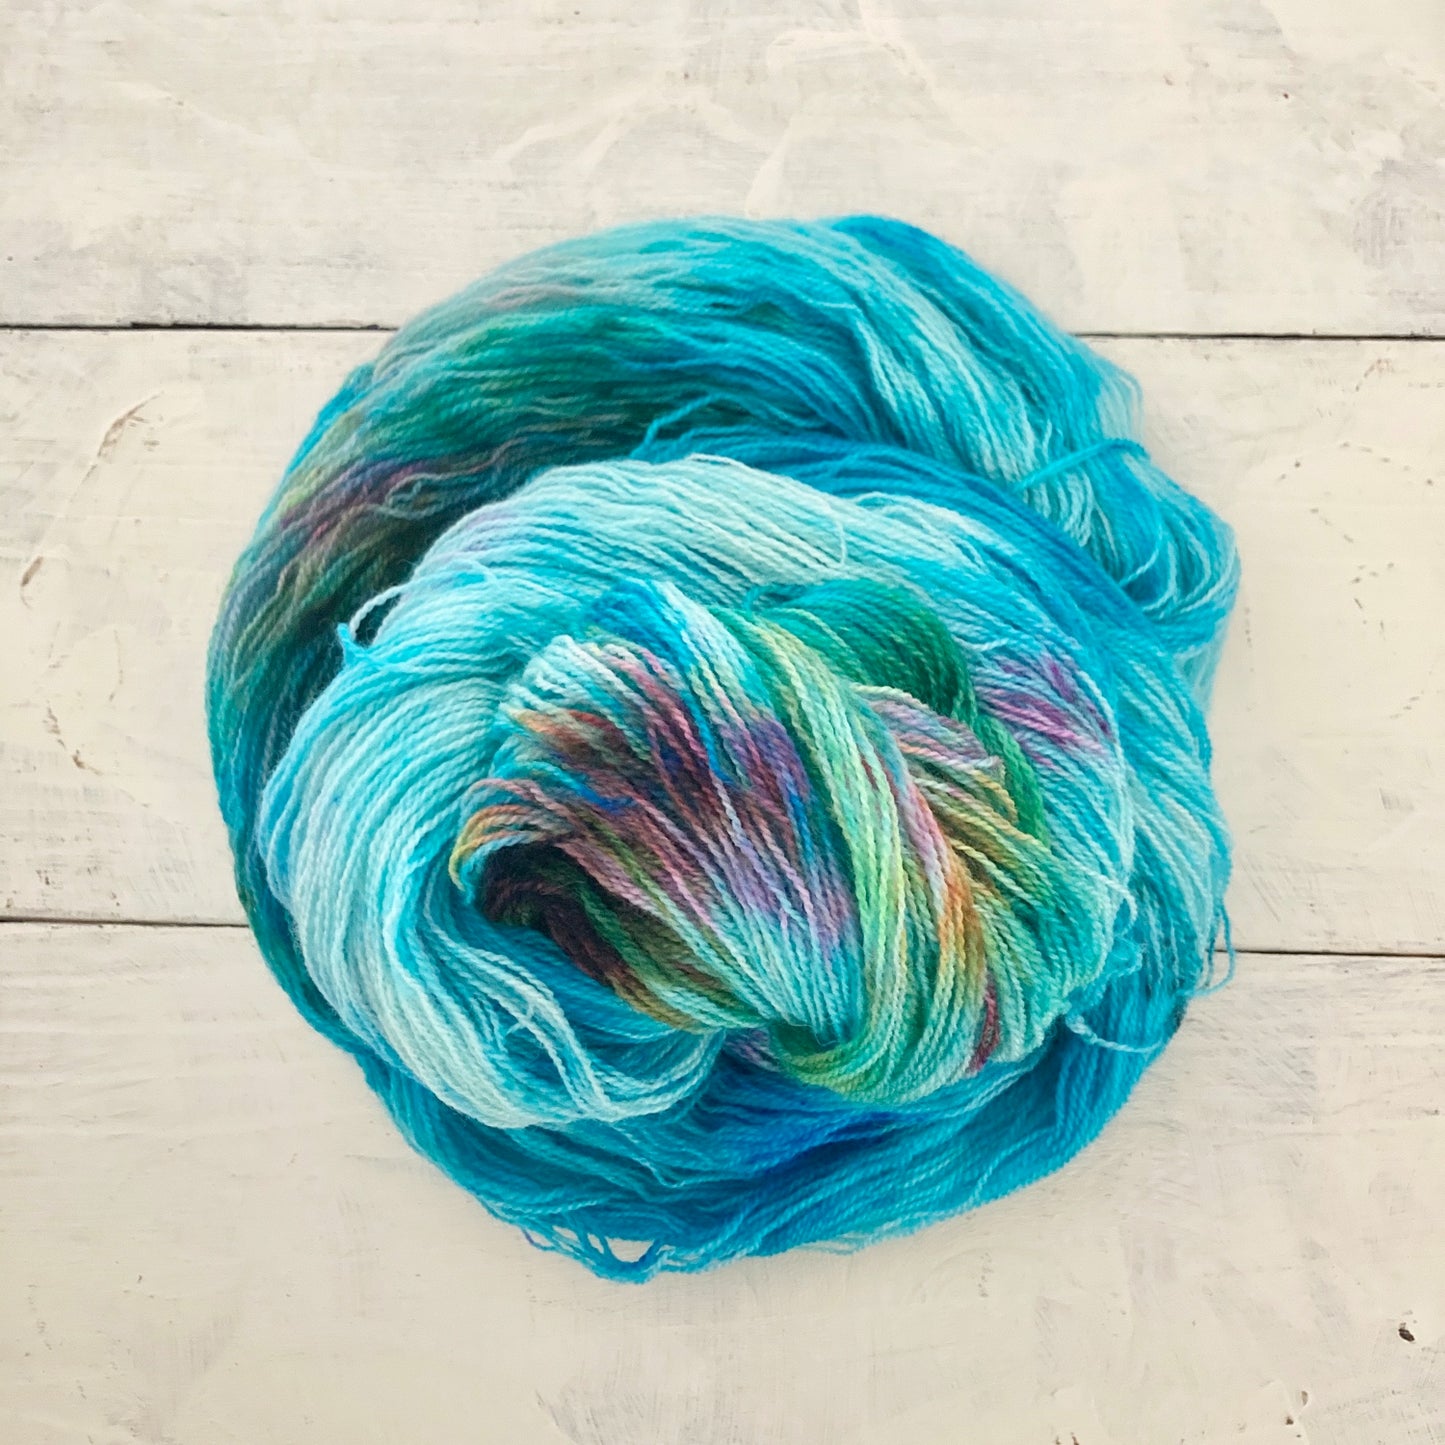 Hand-dyed yarn No.121 Lace "The Sea and Sinbad's Ship"